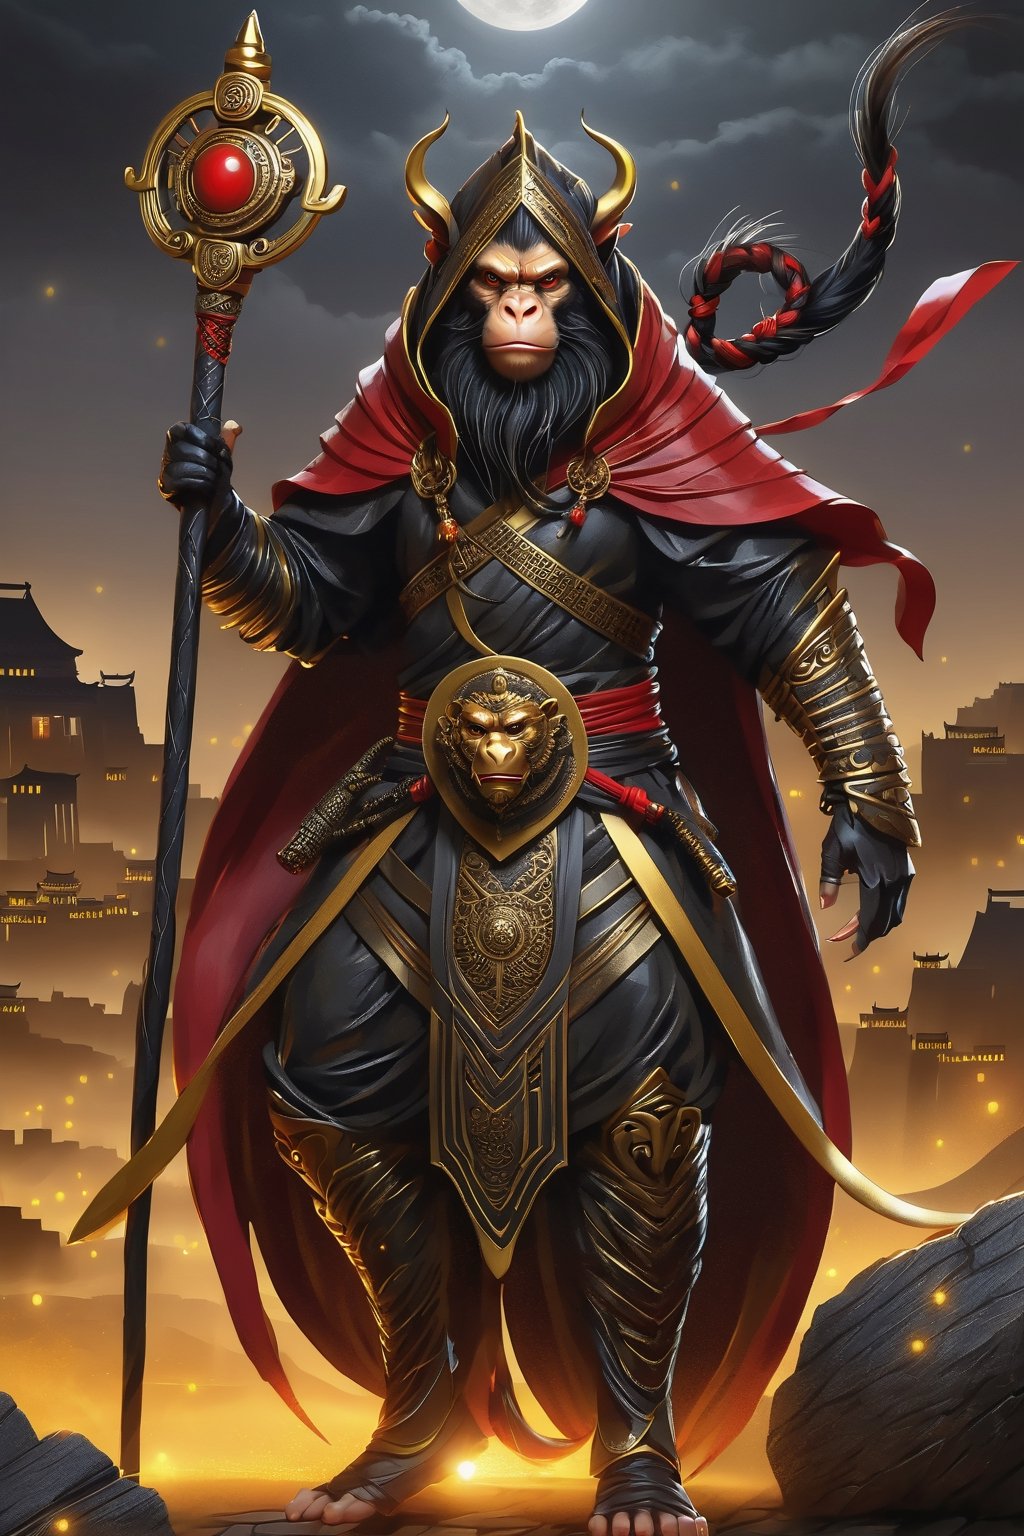 a man  Mythical hero Monkey-like features Playful yet serious expression Humanoid figure Expressive facial features Mystical aura Iconic headband Tail  
Ancient city Ultra-fine painting
Black armor
Red cloak
Fierce expression
Yellow metal staff
Indomitable will
Invincible aura
Lonely guardian
Warring States, Three Kingdoms style
Aerial view
Ferocious face
Sharp eyes
Fluttering armor and cloak
Ruined ancient city
Desolate atmosphere
Central figure
Dark sky
Dark, gray, brown tones Red and gold highlights


3D Realistic Style Highly detailed 4k, 8k, highres: 4K, 8K
Realistic, photorealistic, photo-realistic, in the style of esao andrews,DonM3lv3nM4g1cXL,LegendDarkFantasy,skpleonardostyle,photo r3al